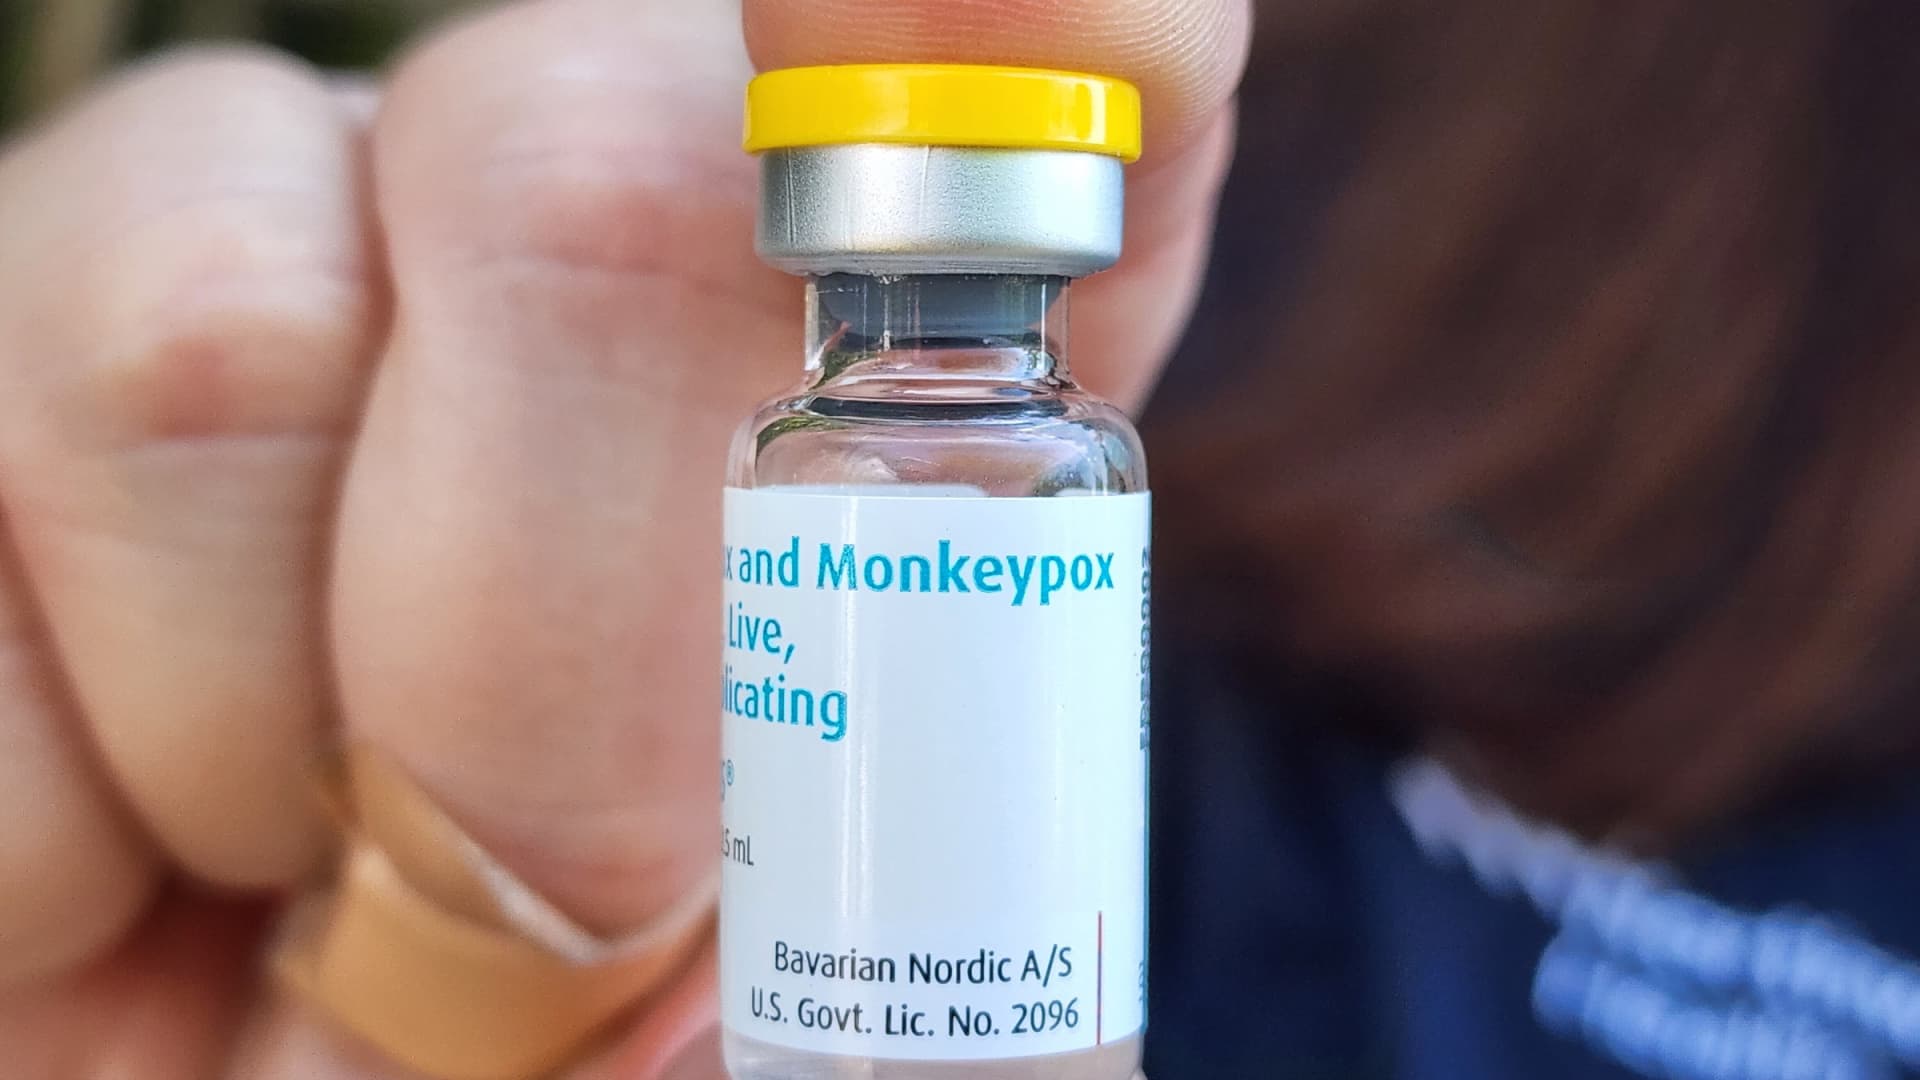 Ohio reports third U.S. death of person with monkeypox